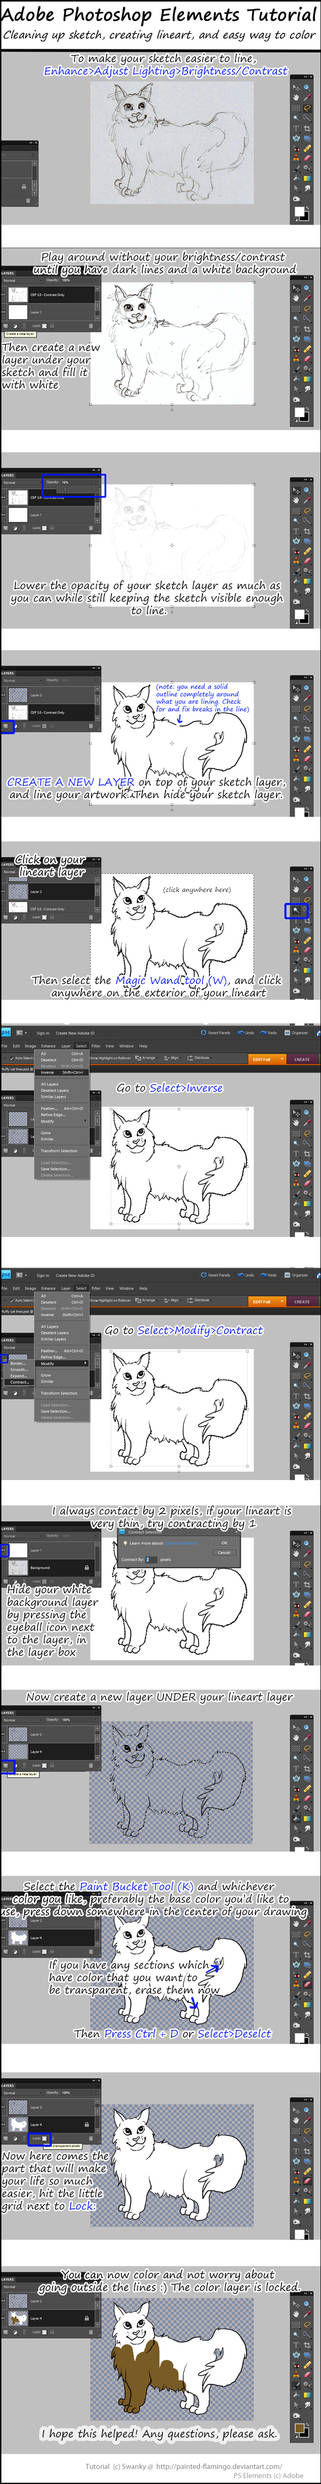 Adobe Photoshop Elements Tutorial: Lineart/ Color